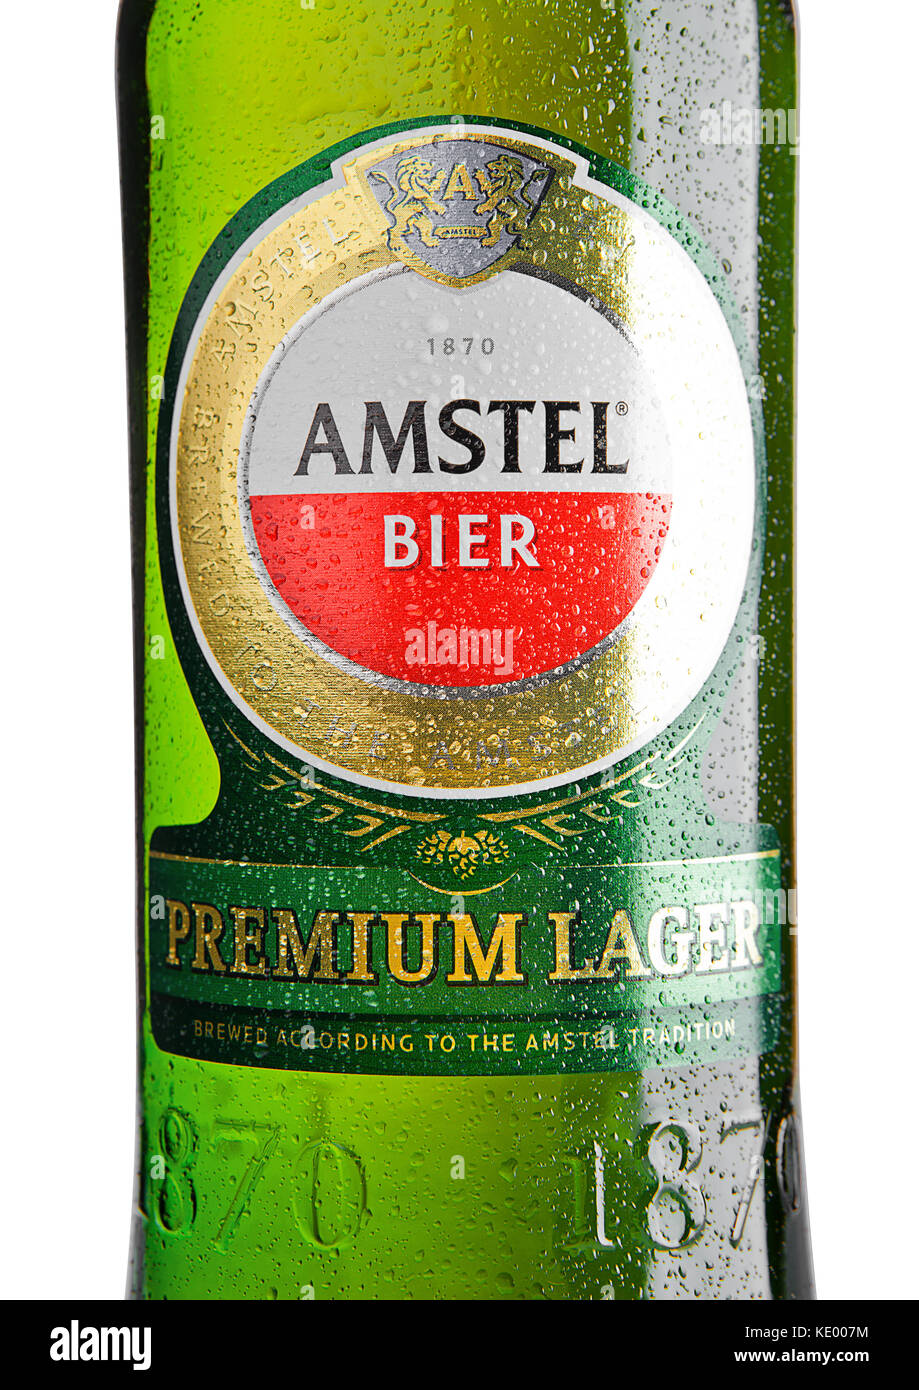 LONDON, UNITED KINGDOM - NOVEMBER 01, 2016: Cold bottle of Amstel Premium Lager on white background.Amstel is an internationally known brand of beer p Stock Photo